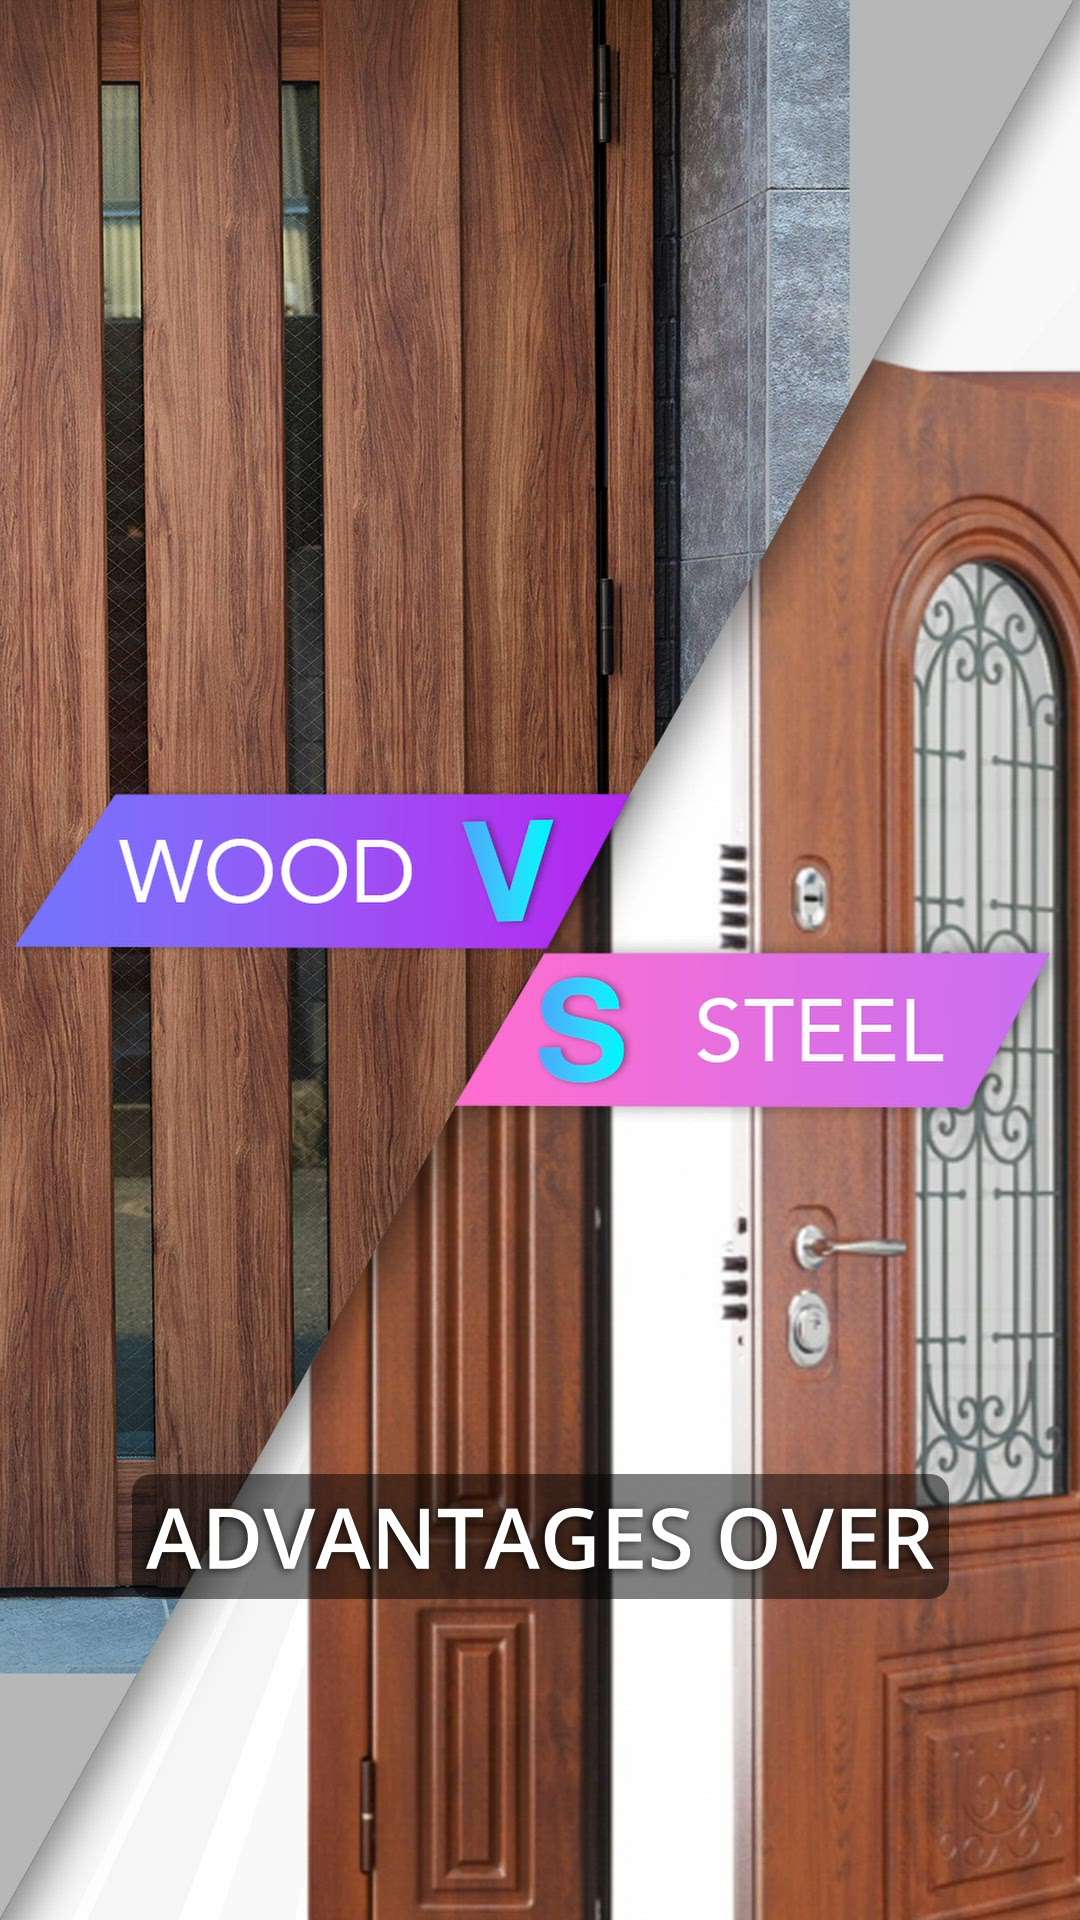 Unlocking the Advantages: Why Steel Doors Outshine Traditional Options 🔒💡 From durability to security, discover why steel doors are the modern choice.   ##SteelDoors
#HomeSecurity
#Durability
#ModernDesign
#HomeImprovement
#SafetyFirst
#EnergyEfficient
#SteelVsWood
#propertyinvestment